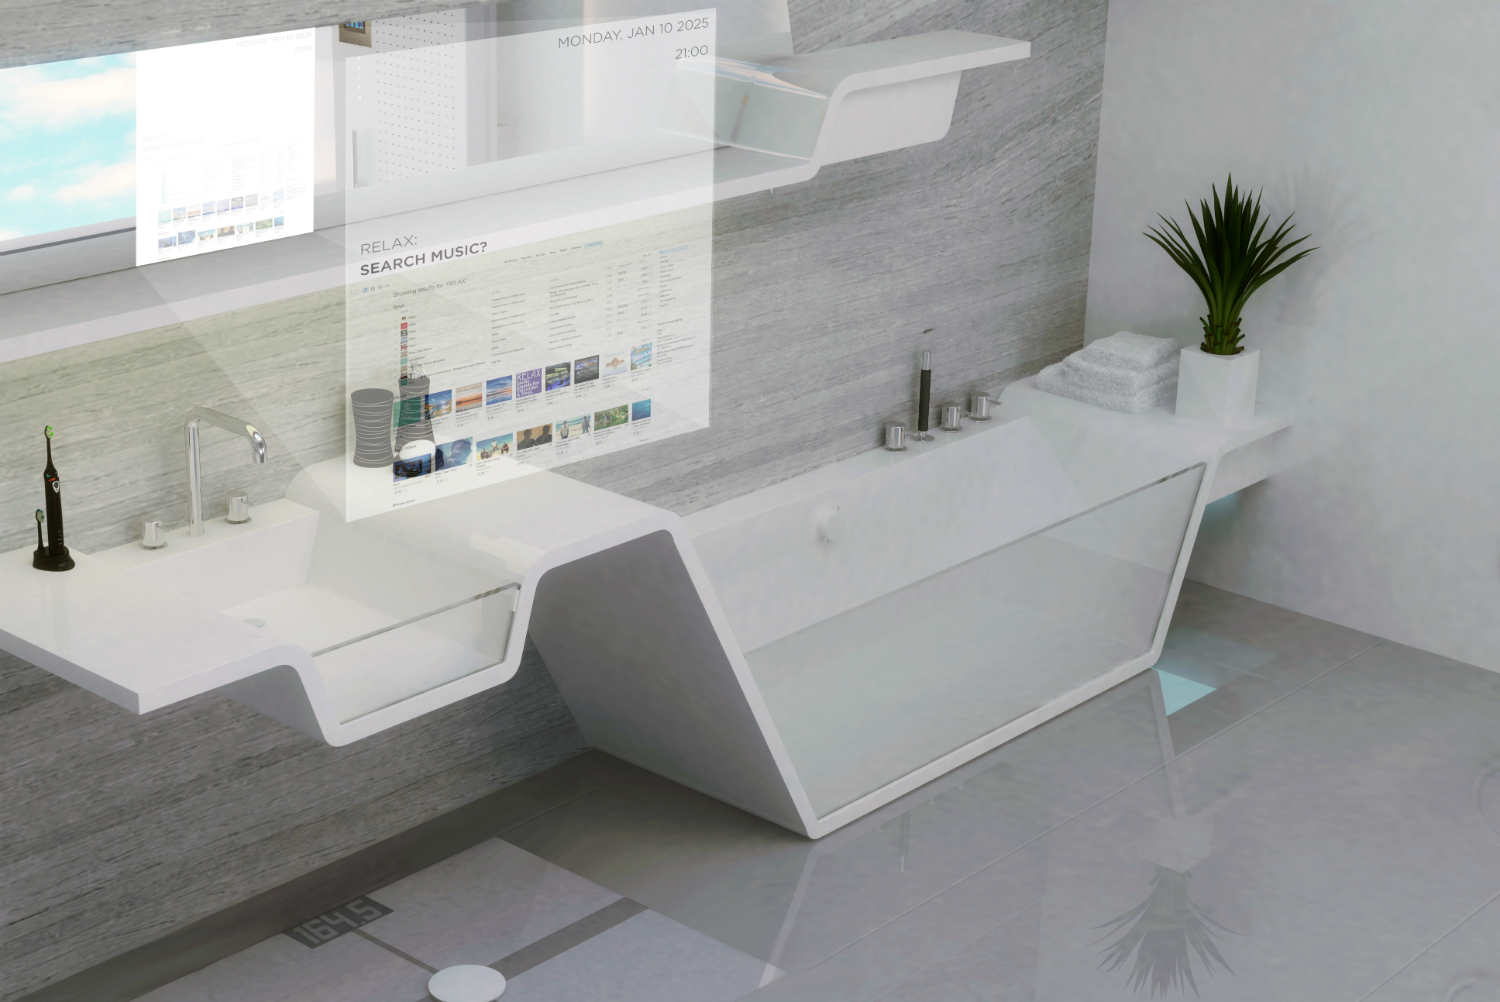 Smart Bathroom: 8 facts about the bathroom of the future